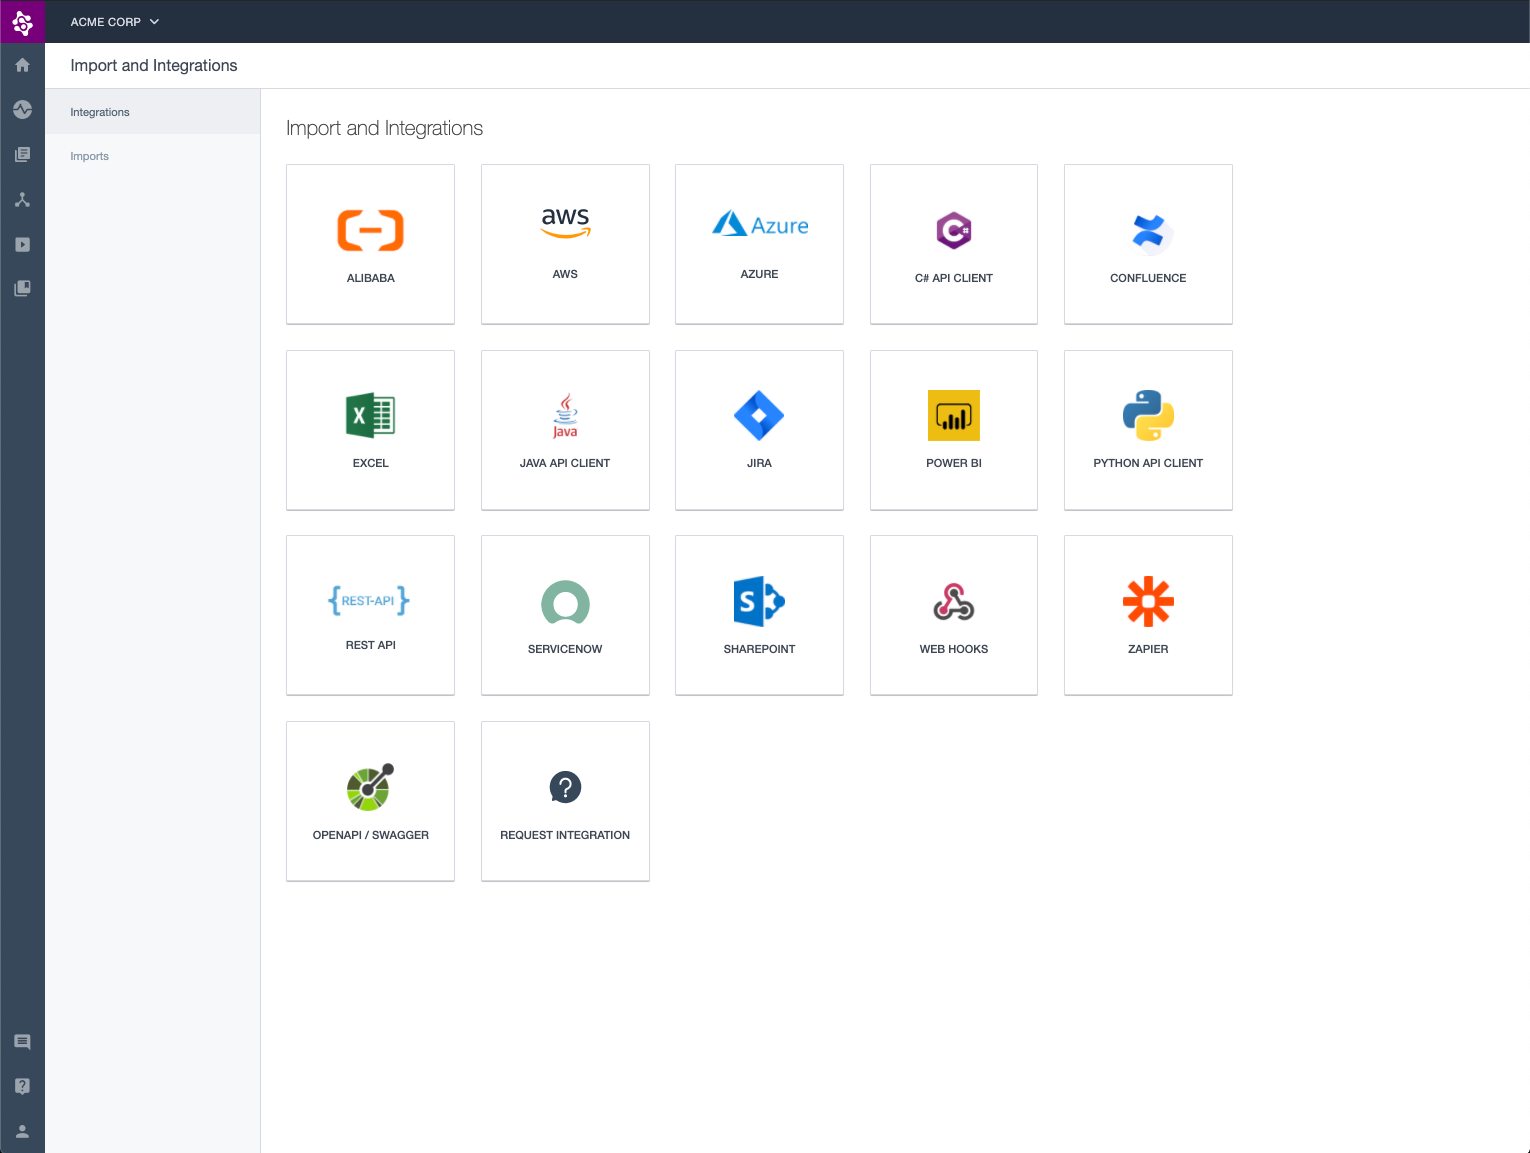 Stop manually maintaining your architecture. Connect Ardoq with structured data sources like AWS, ServiceNow, Azure, and many more.